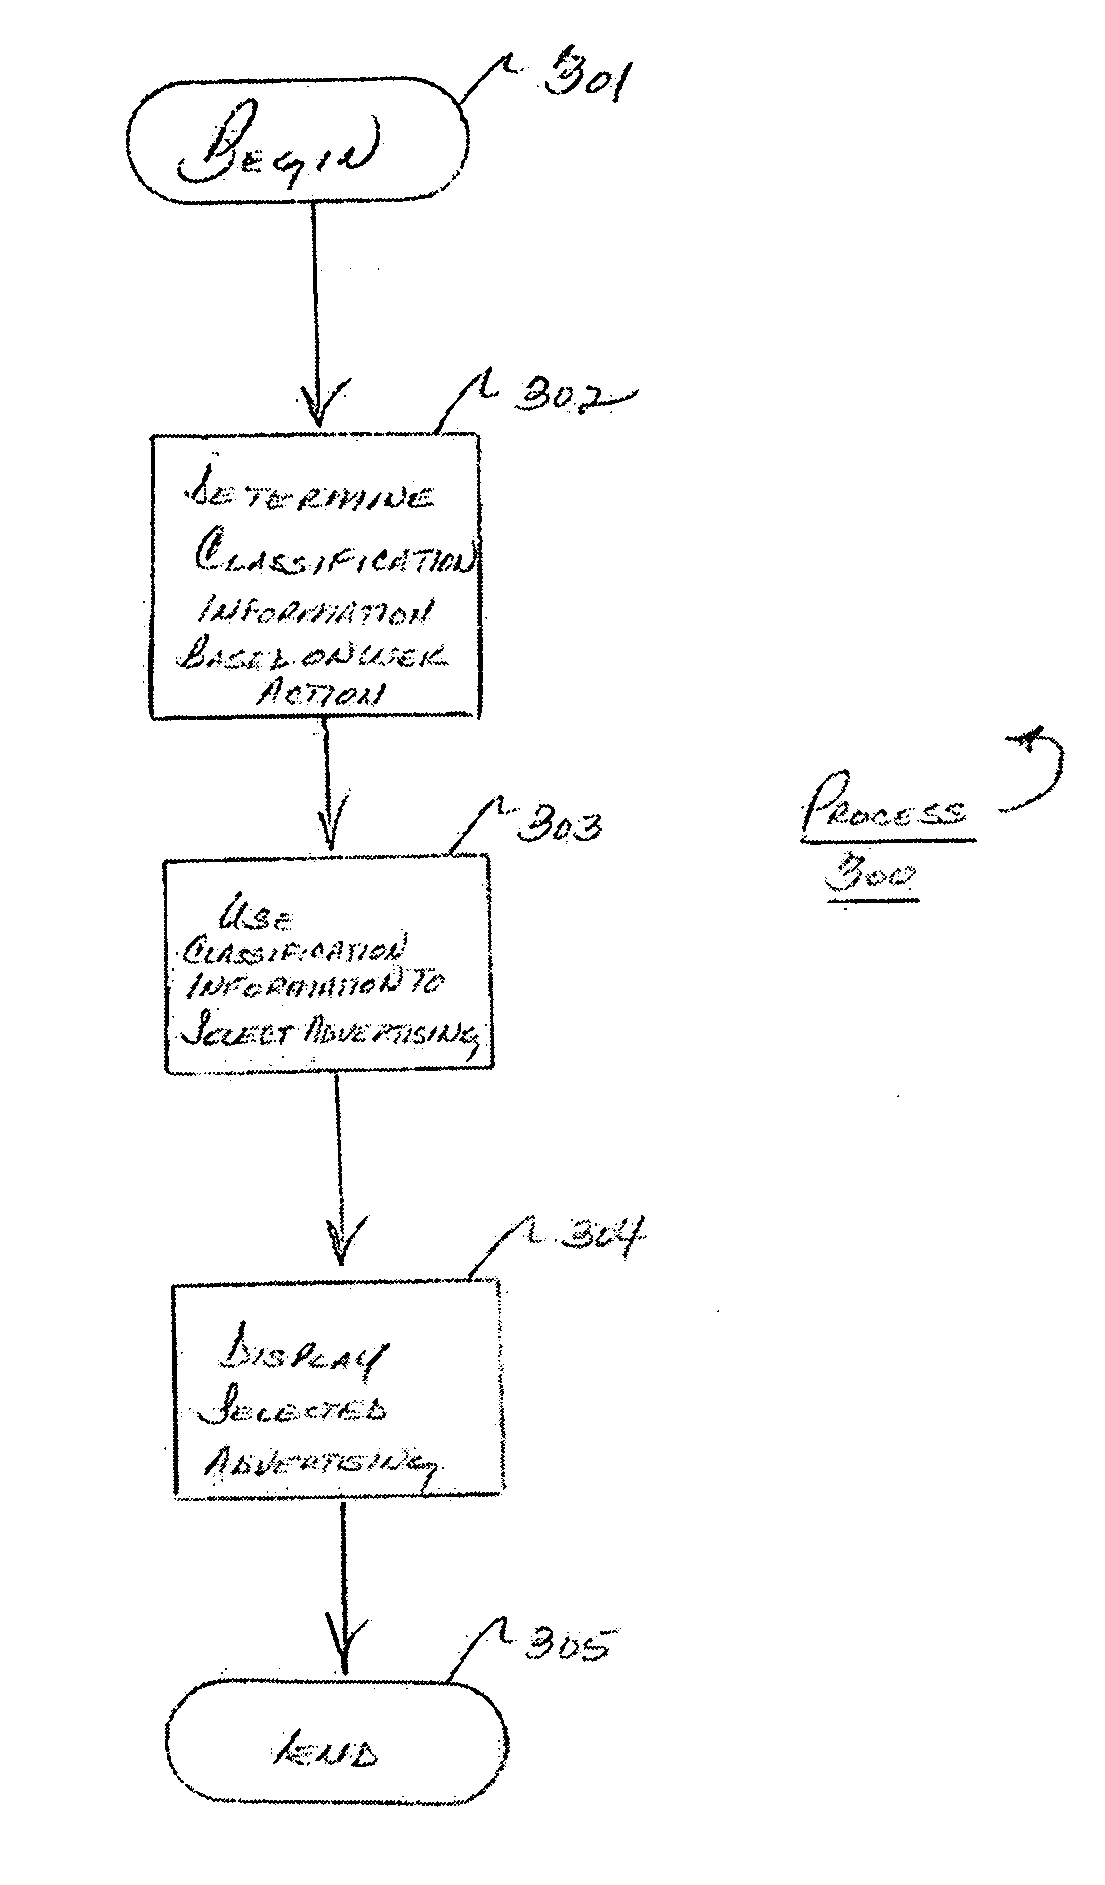 System and method for selecting advertising